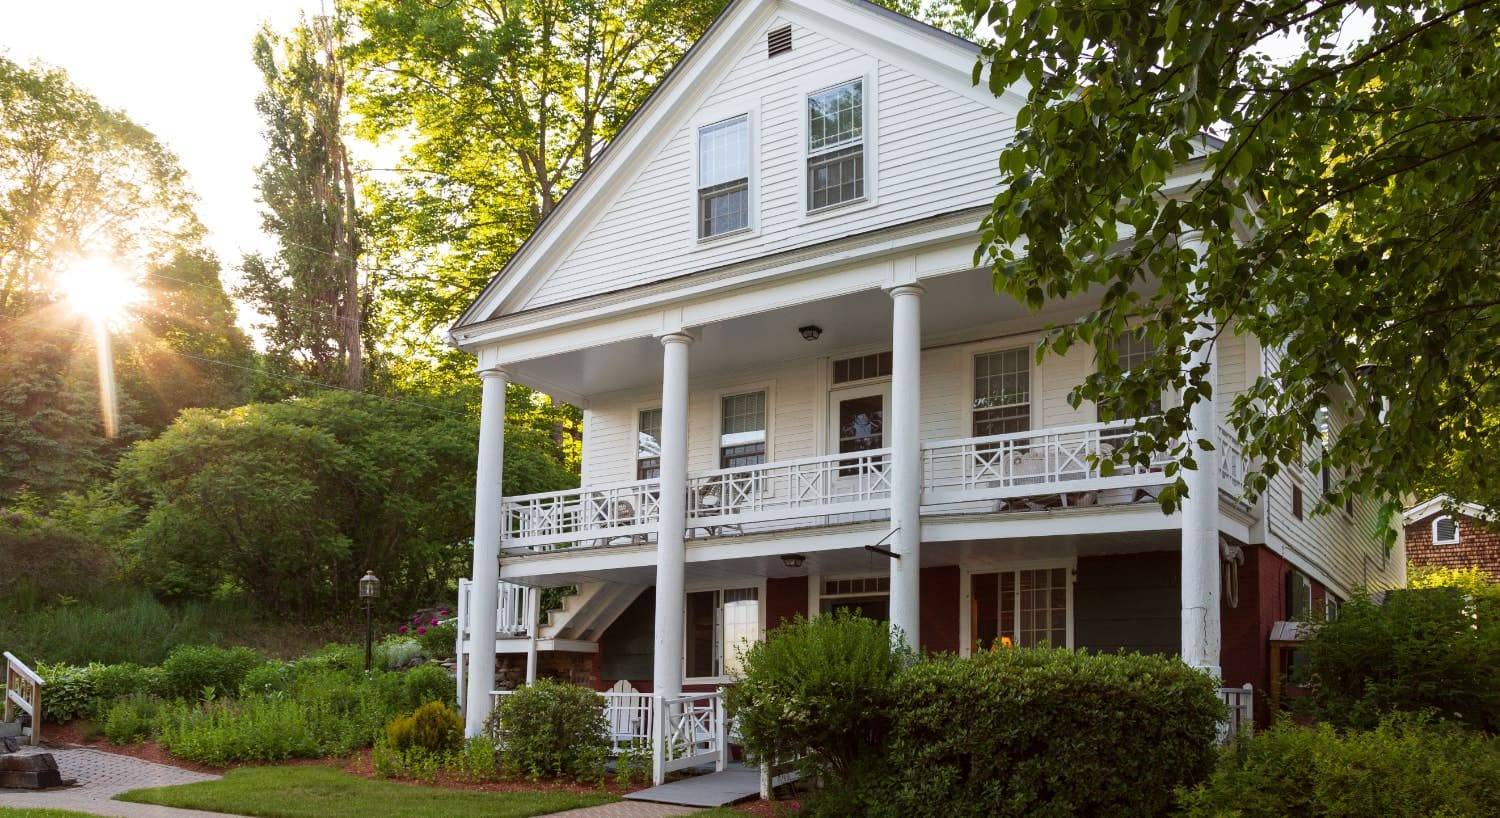 Exterior view of the property painted white with front porch and second level porch all surrounded by large green trees and shrubs with sun in the background